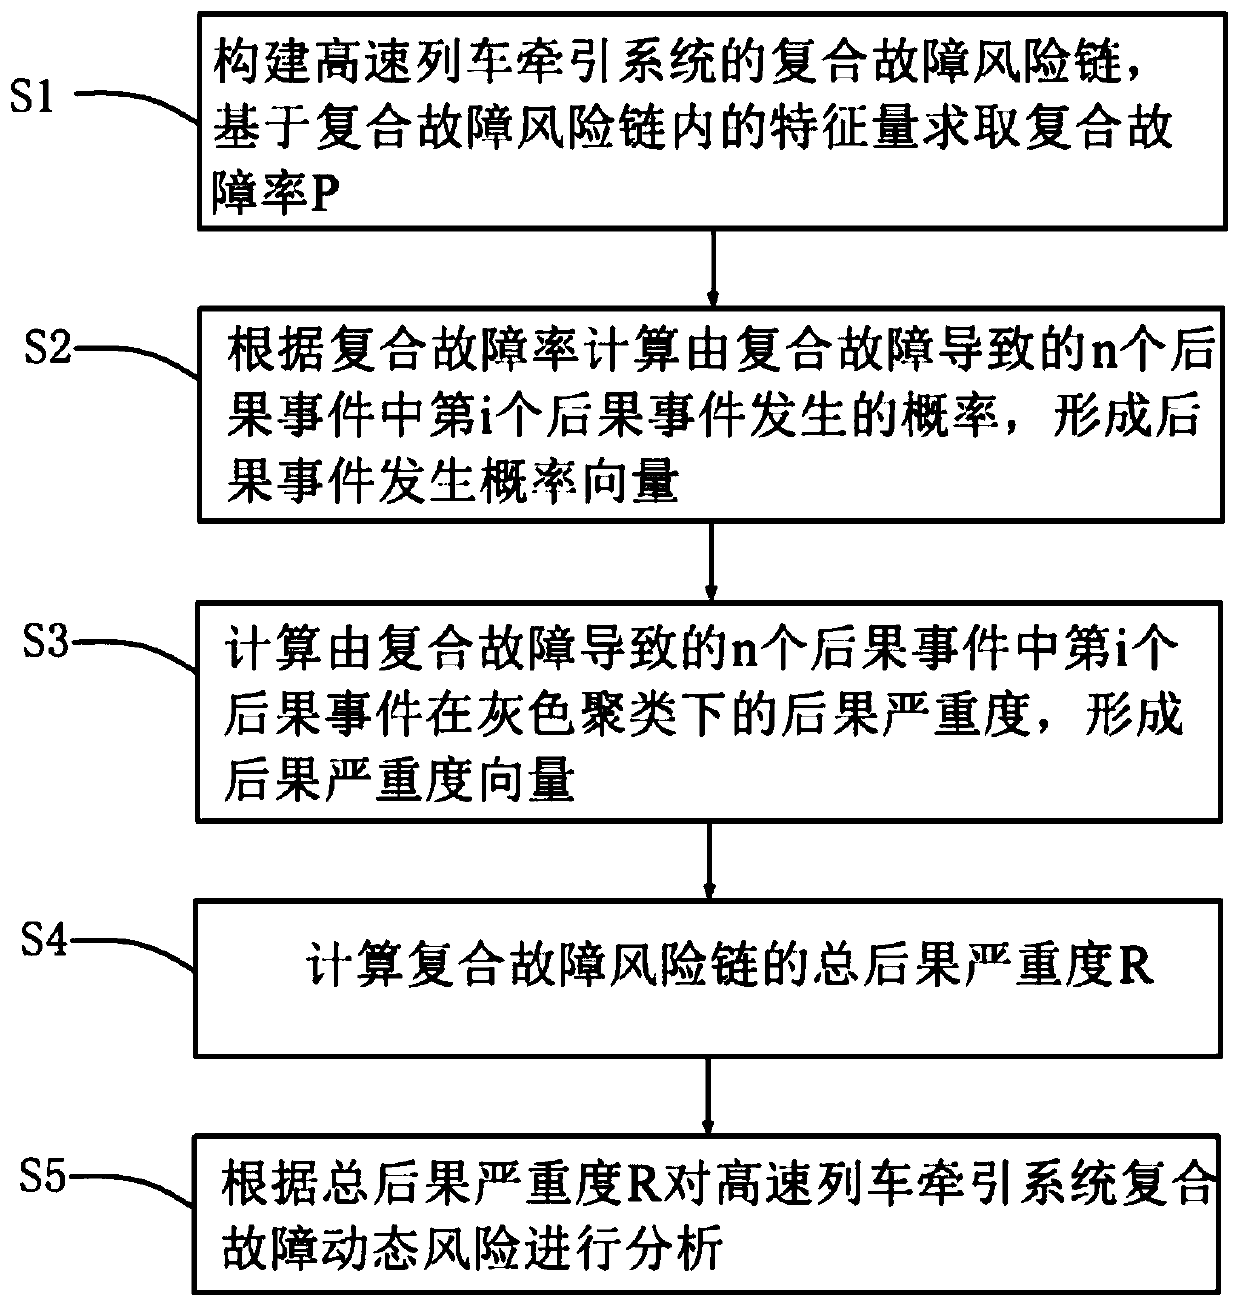 High-speed train traction system composite fault dynamic risk analysis method based on characteristic quantity